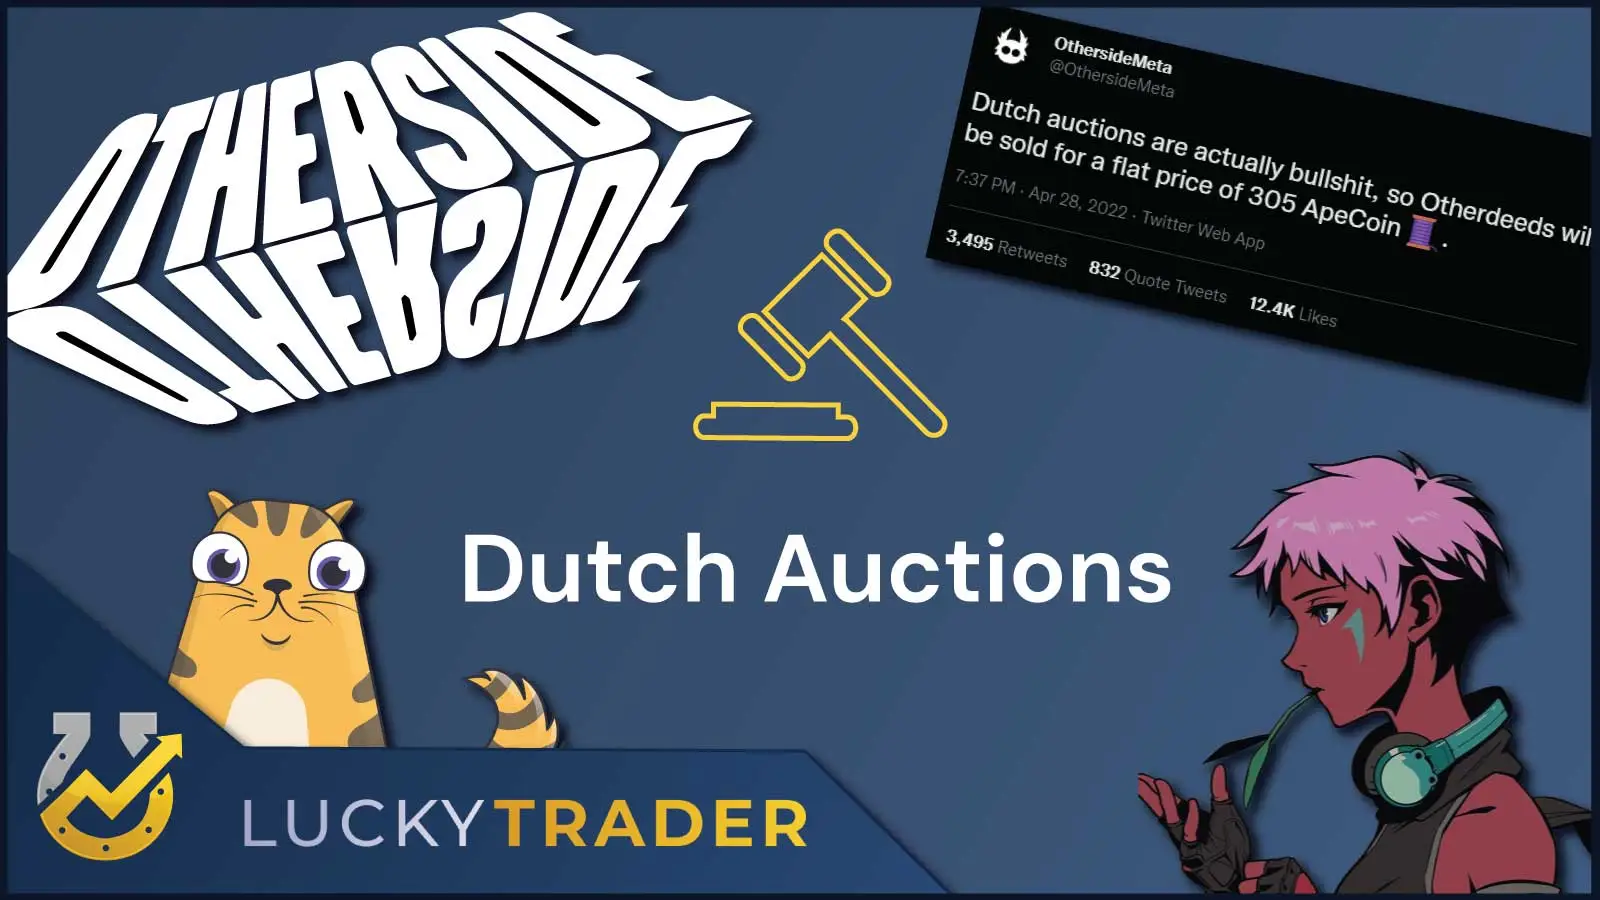 Are Dutch Auctions Really Bull$&!#?